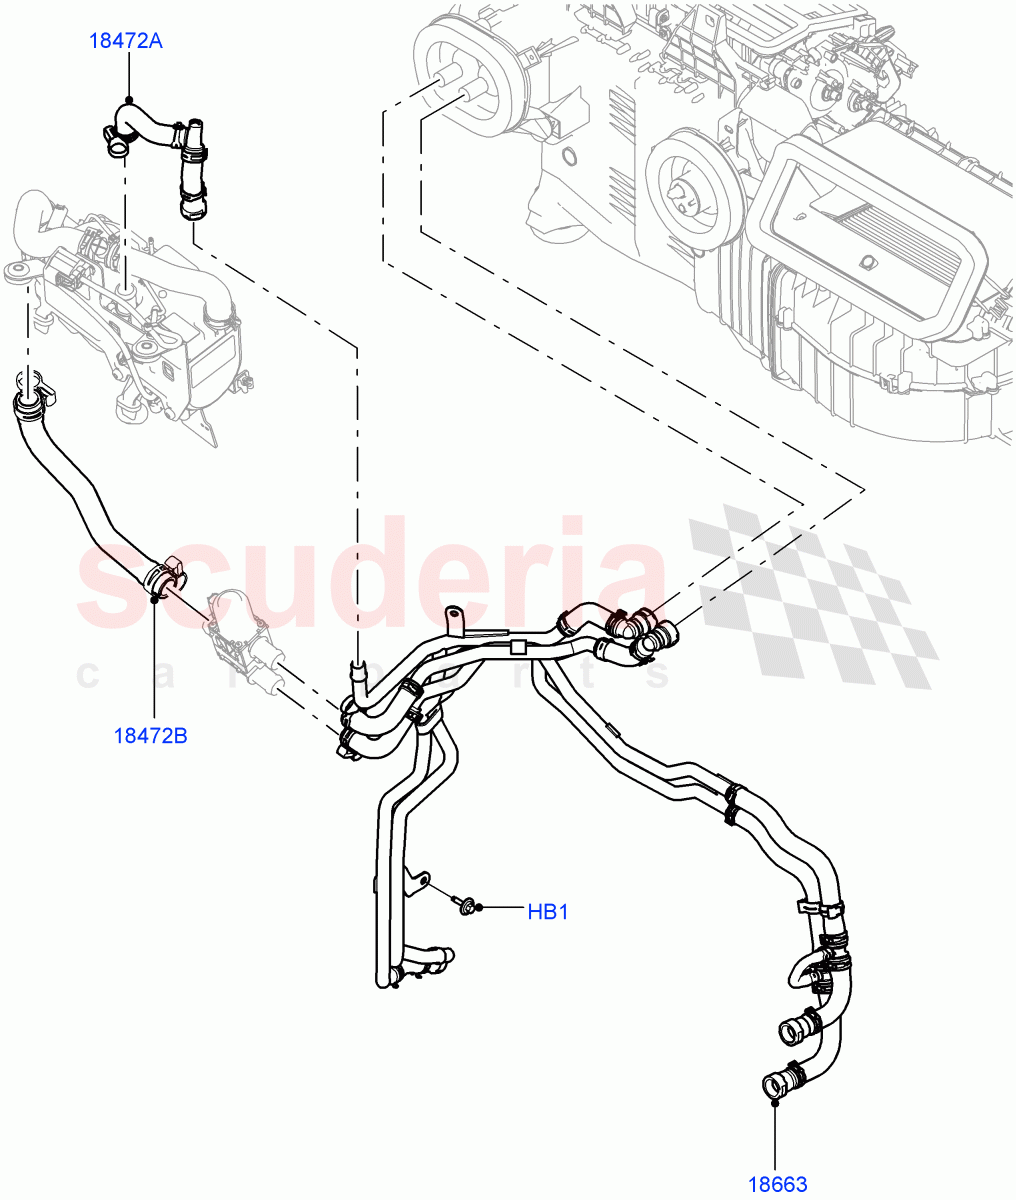 Heater Hoses(Solihull Plant Build)(2.0L I4 DSL MID DOHC AJ200,With Fuel Fired Heater,With Air Conditioning - Front/Rear,Park Heating With Remote Control,2.0L I4 DSL HIGH DOHC AJ200)((V)FROMHA000001,(V)TOHA999999) of Land Rover Land Rover Discovery 5 (2017+) [2.0 Turbo Diesel]